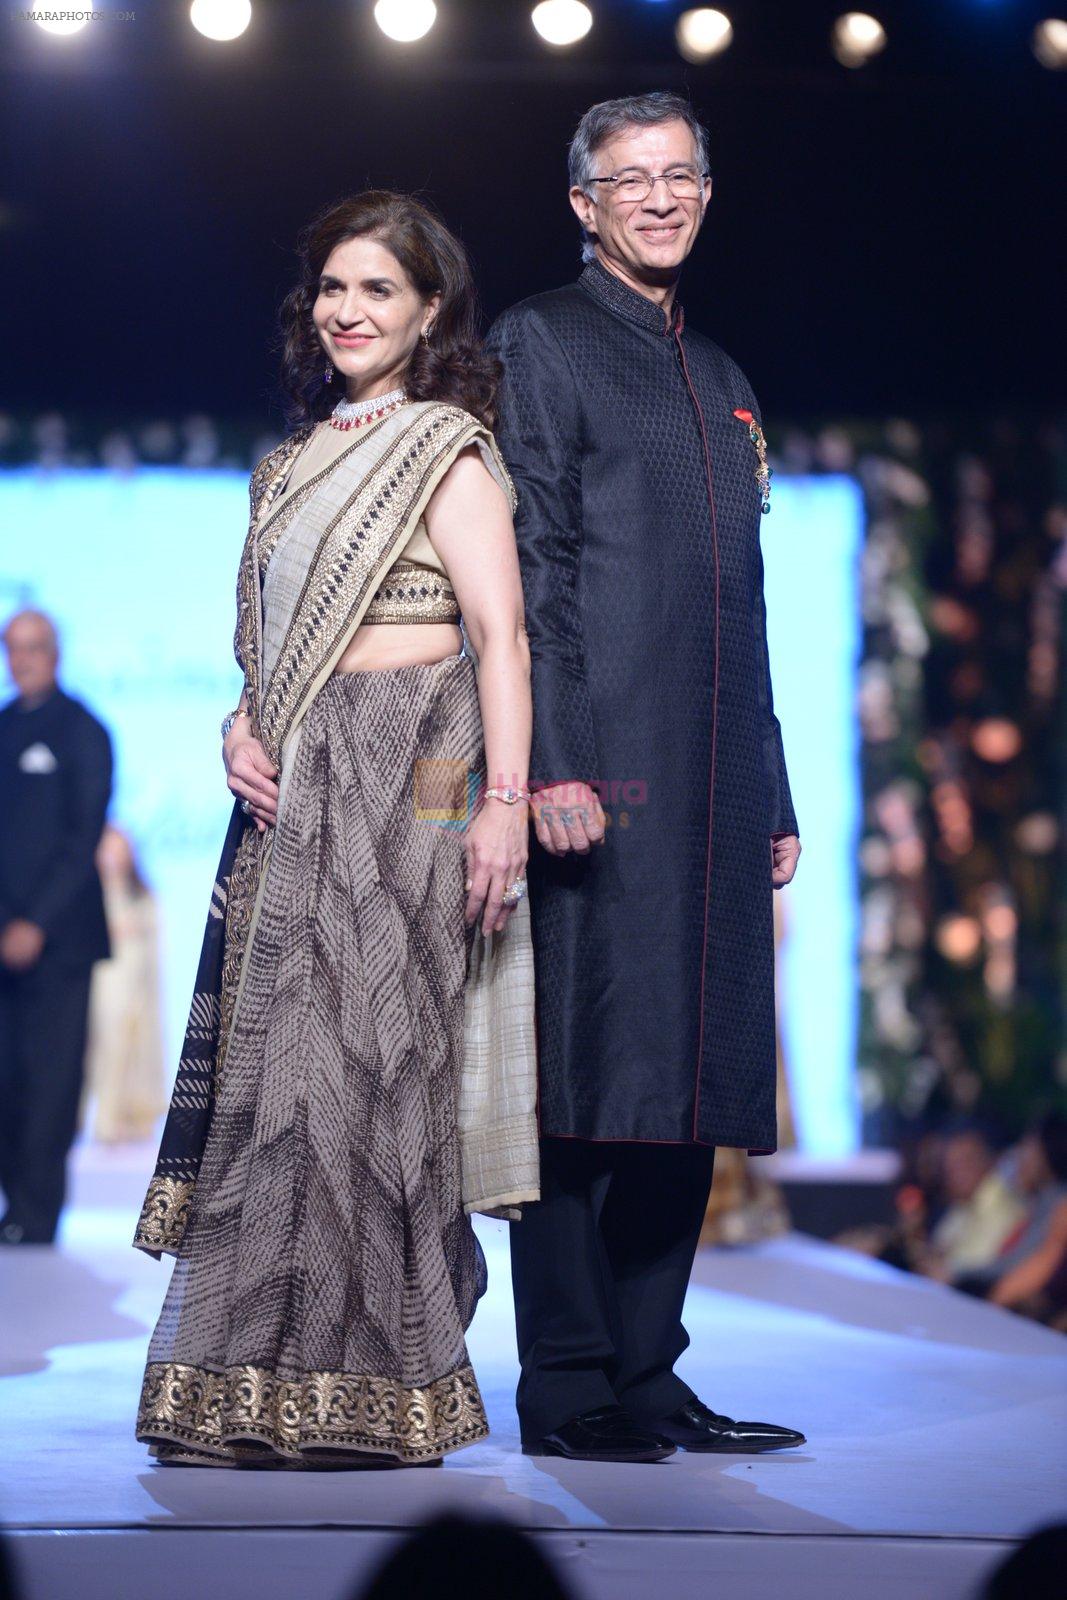 at Shaina NC-Manish Malhotra Pidilite Show for CPAA on 1st March 2015